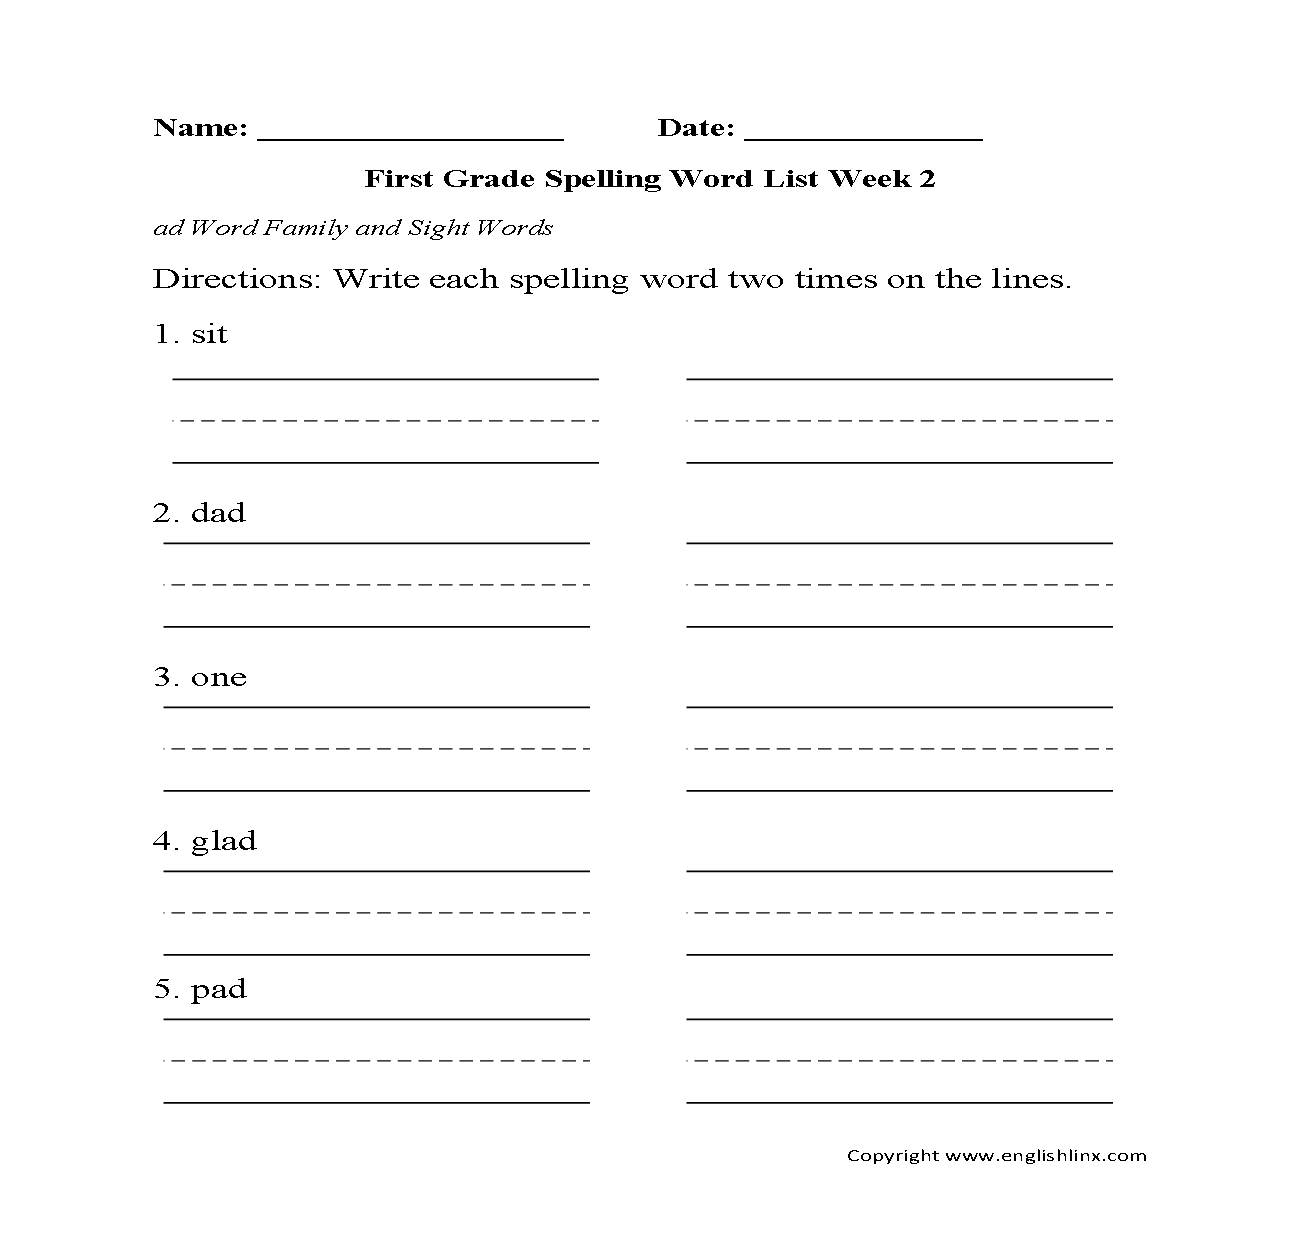 Week 2 ad family First Grade Spelling Words Worksheets